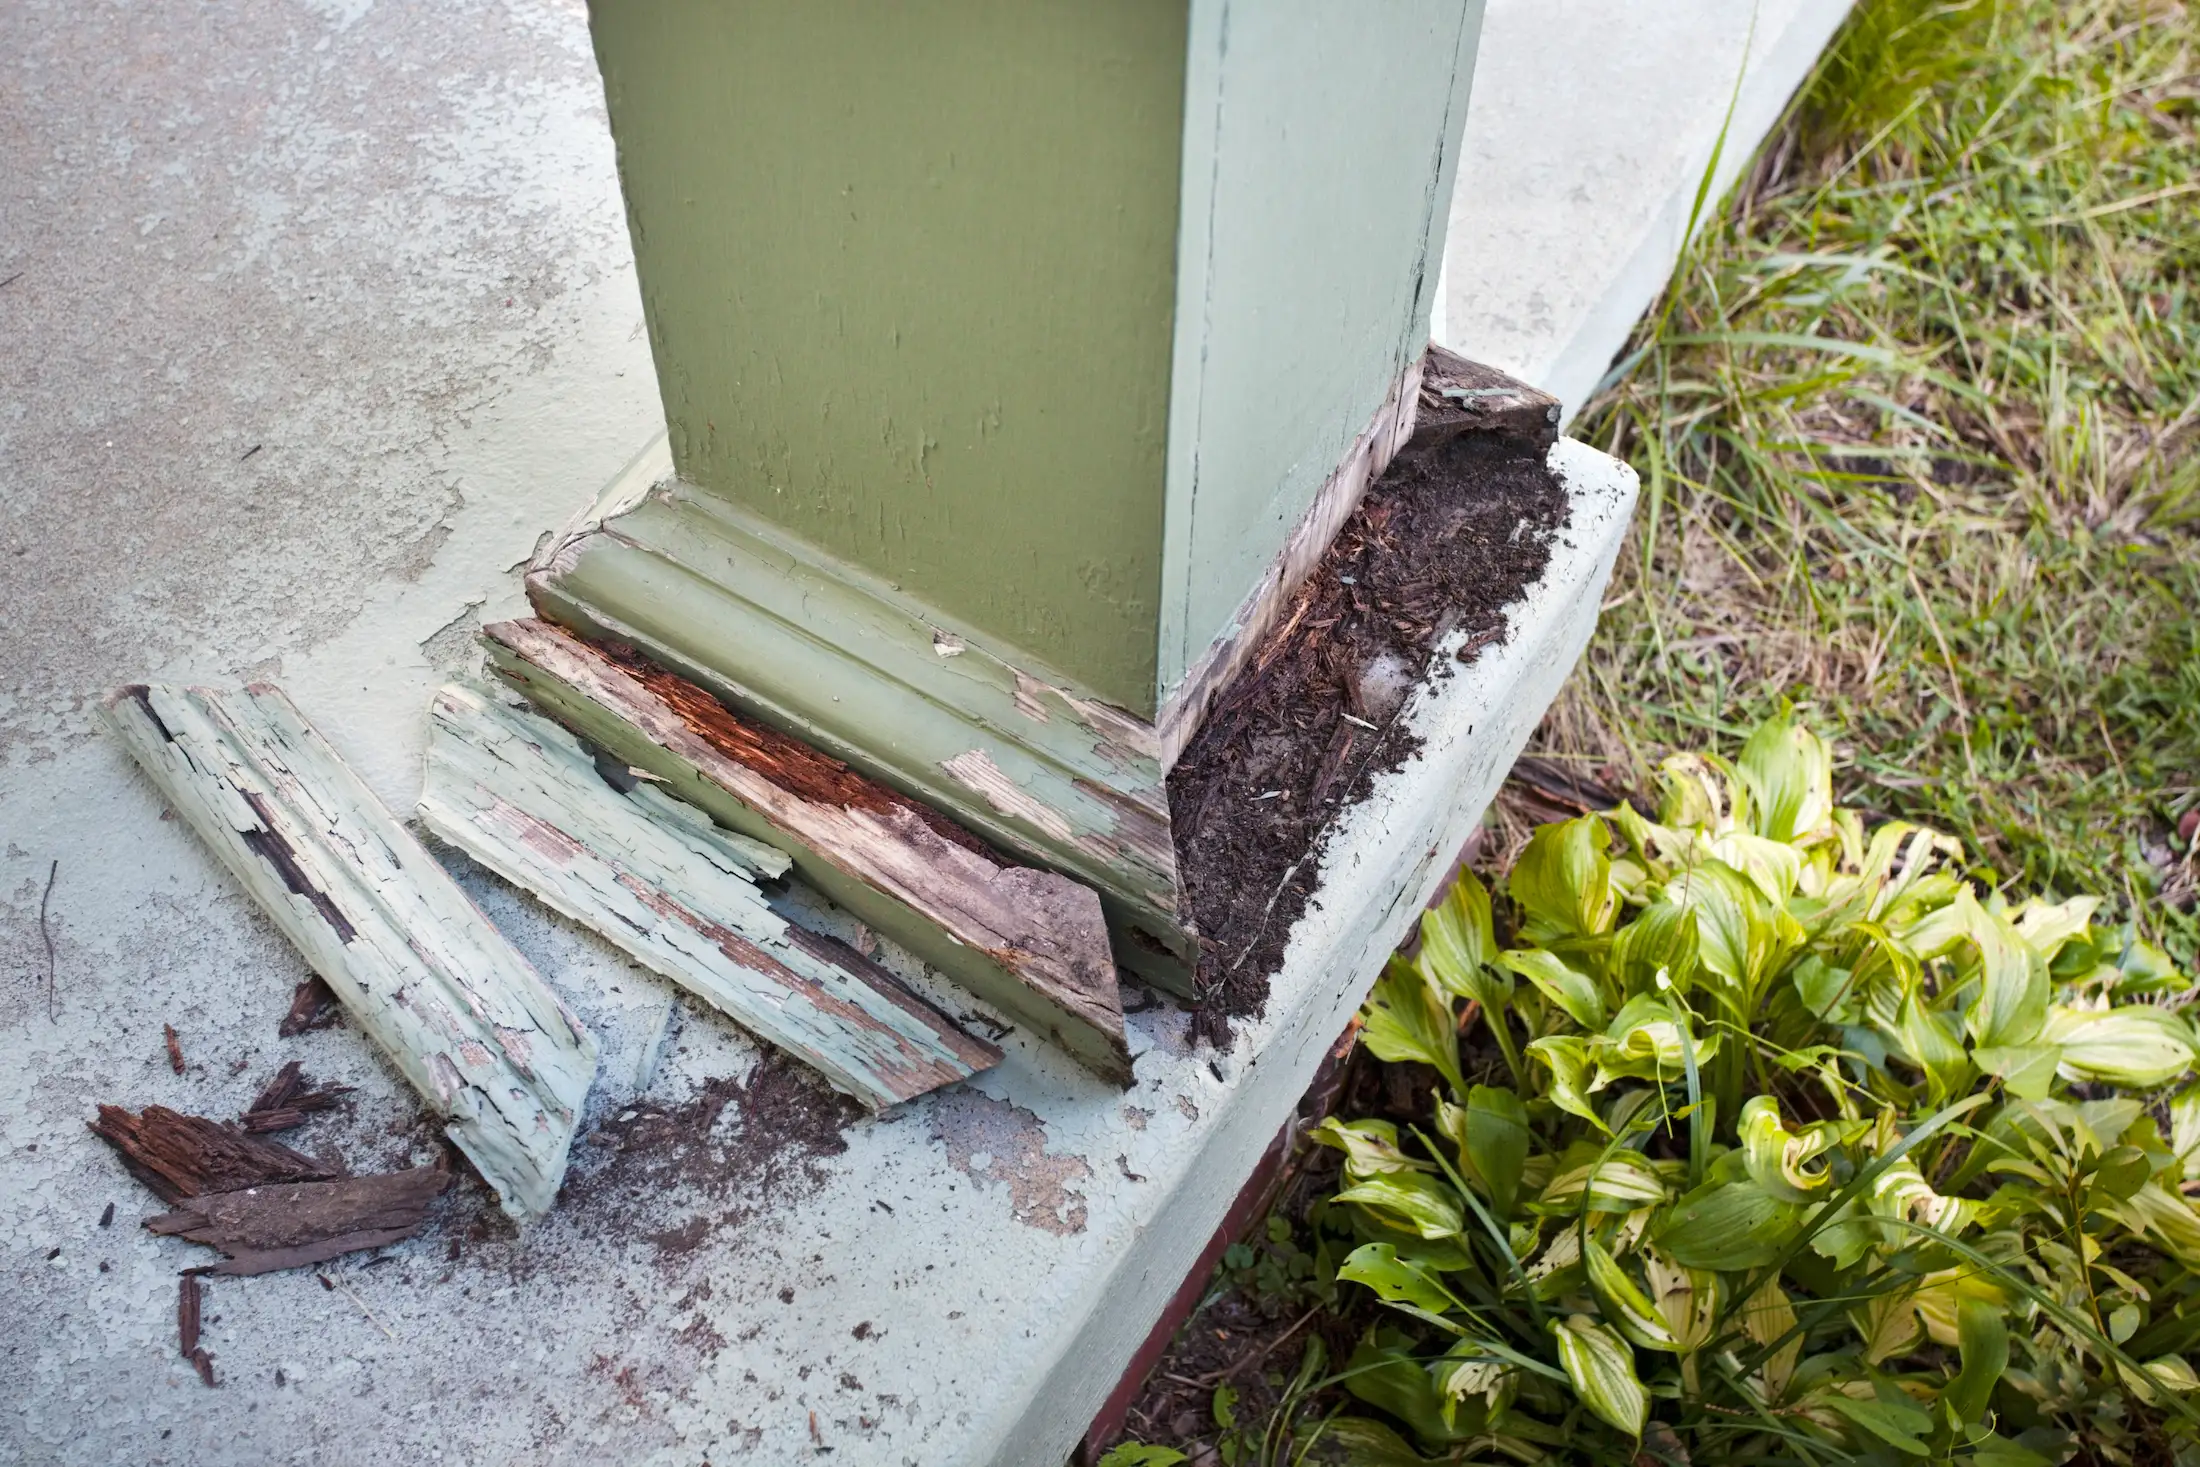 Termites eating away a wooden pillar on a porch - Stop termites from damaging your house with Seitz Bros Pest Control in Tamaqua, PA 